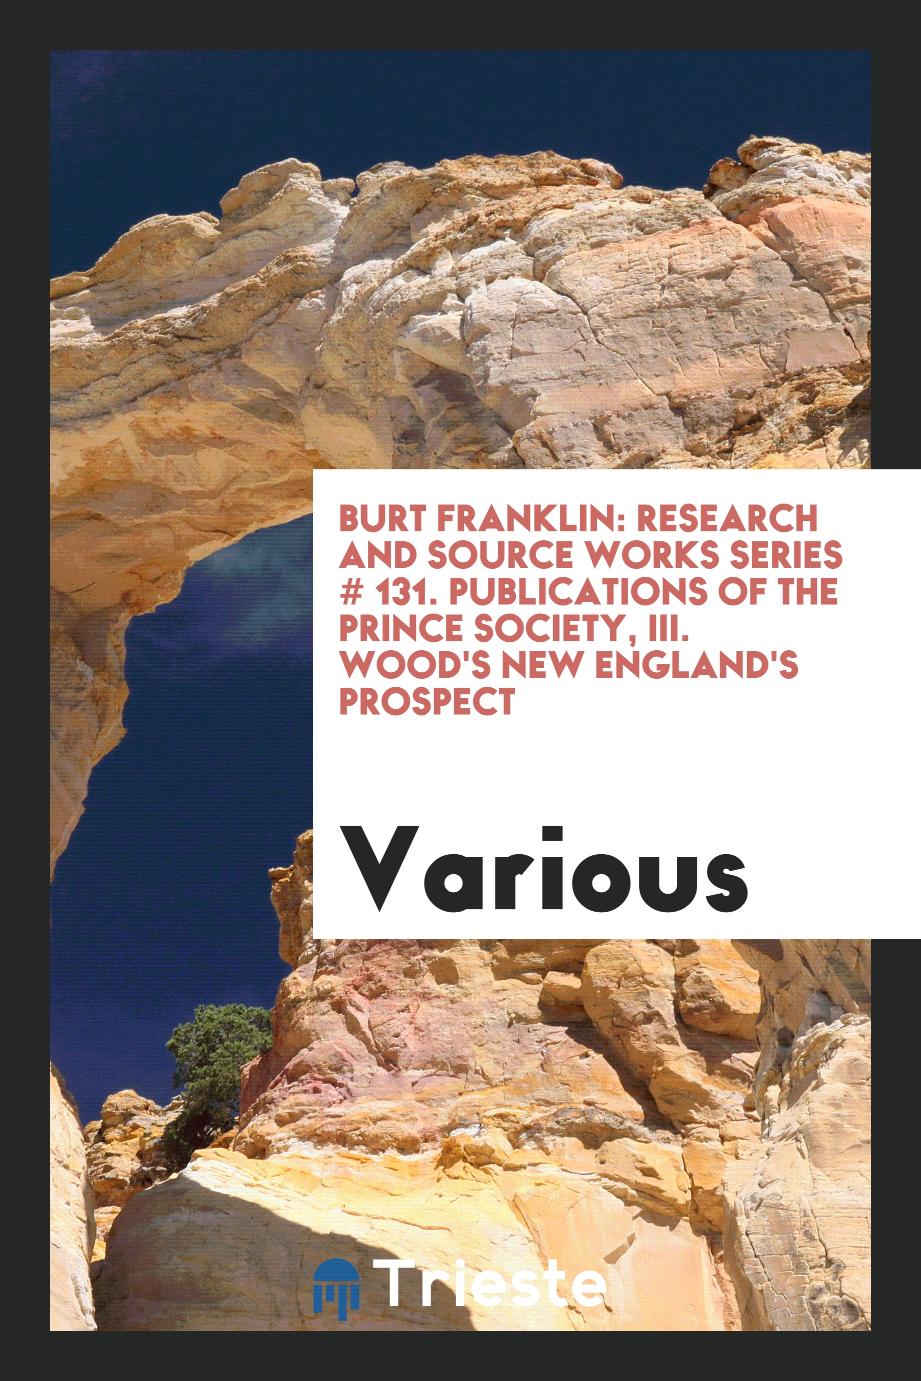 Burt Franklin: Research and Source Works Series # 131. Publications of the Prince Society, III. Wood's New England's Prospect